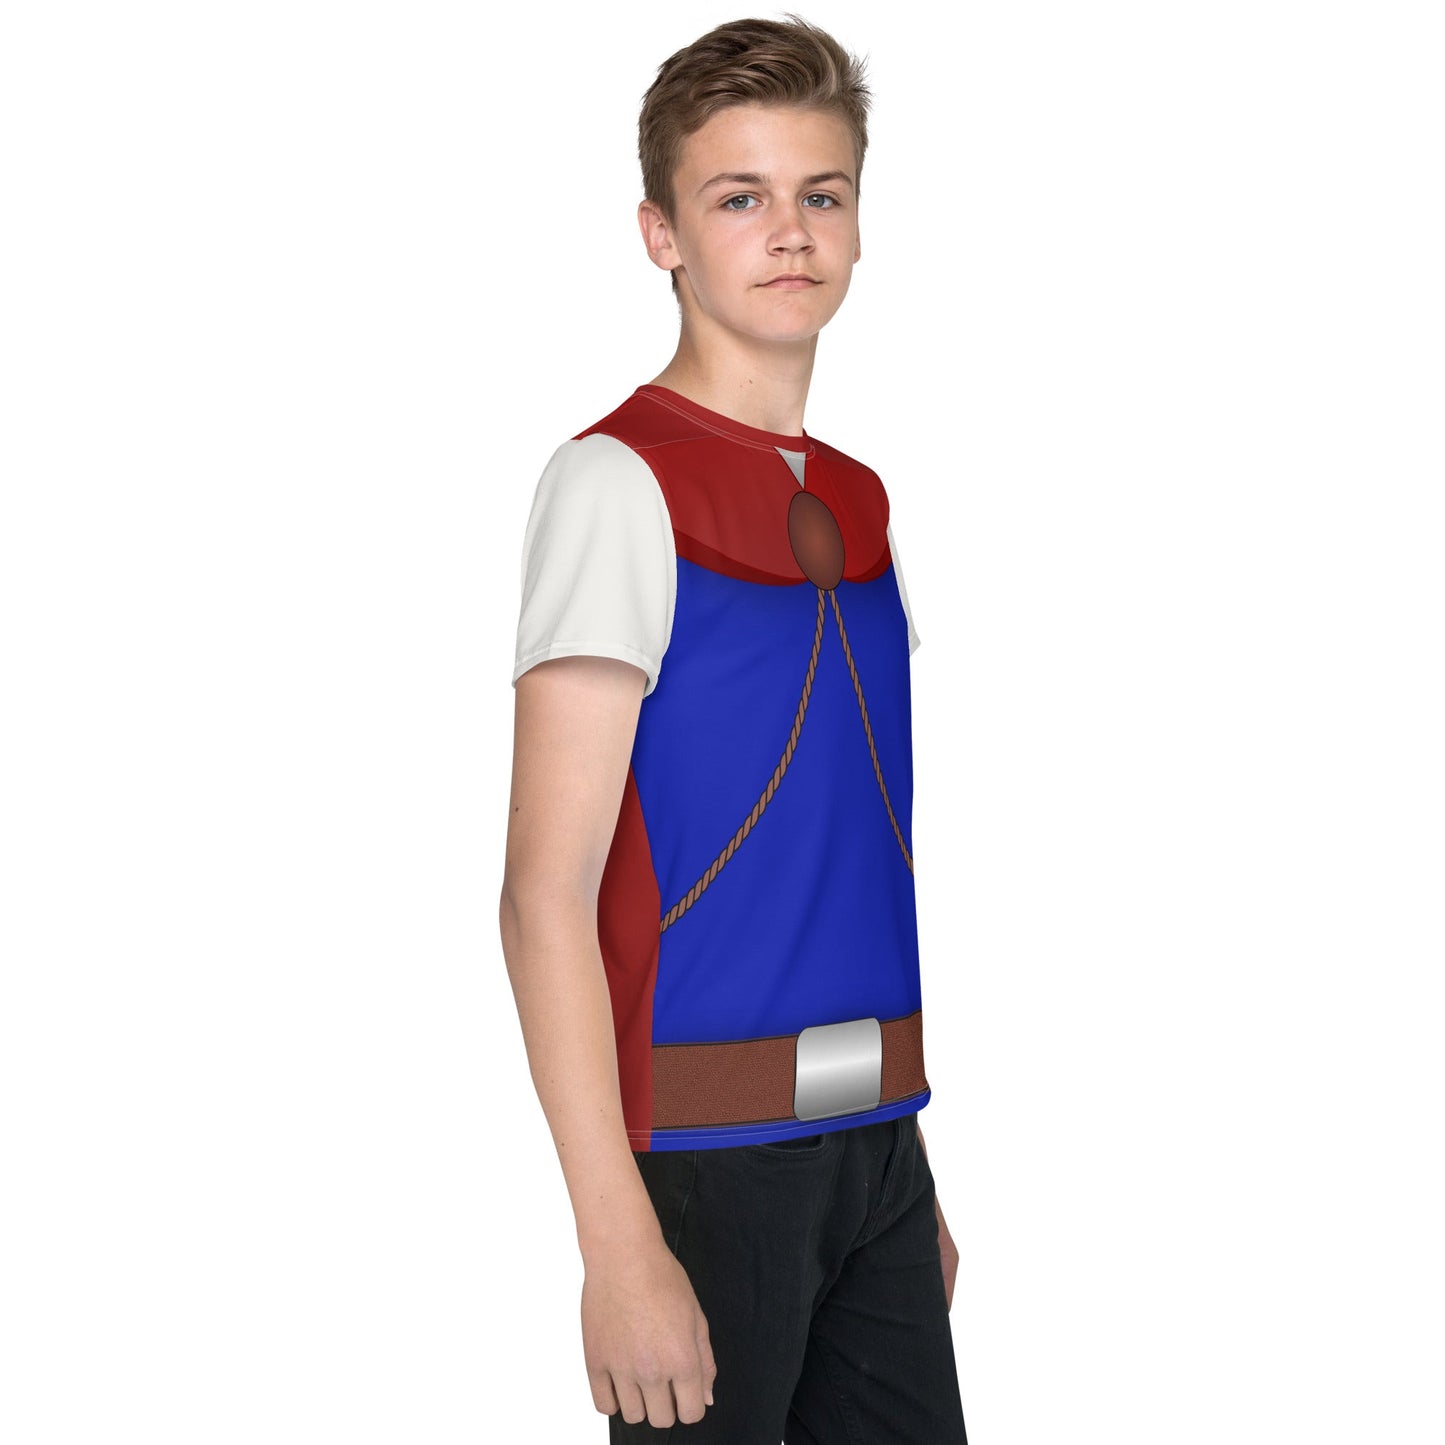 The Florian Youth crew neck t-shirt All Over Printboys disneyKids T-ShirtWrong Lever Clothing